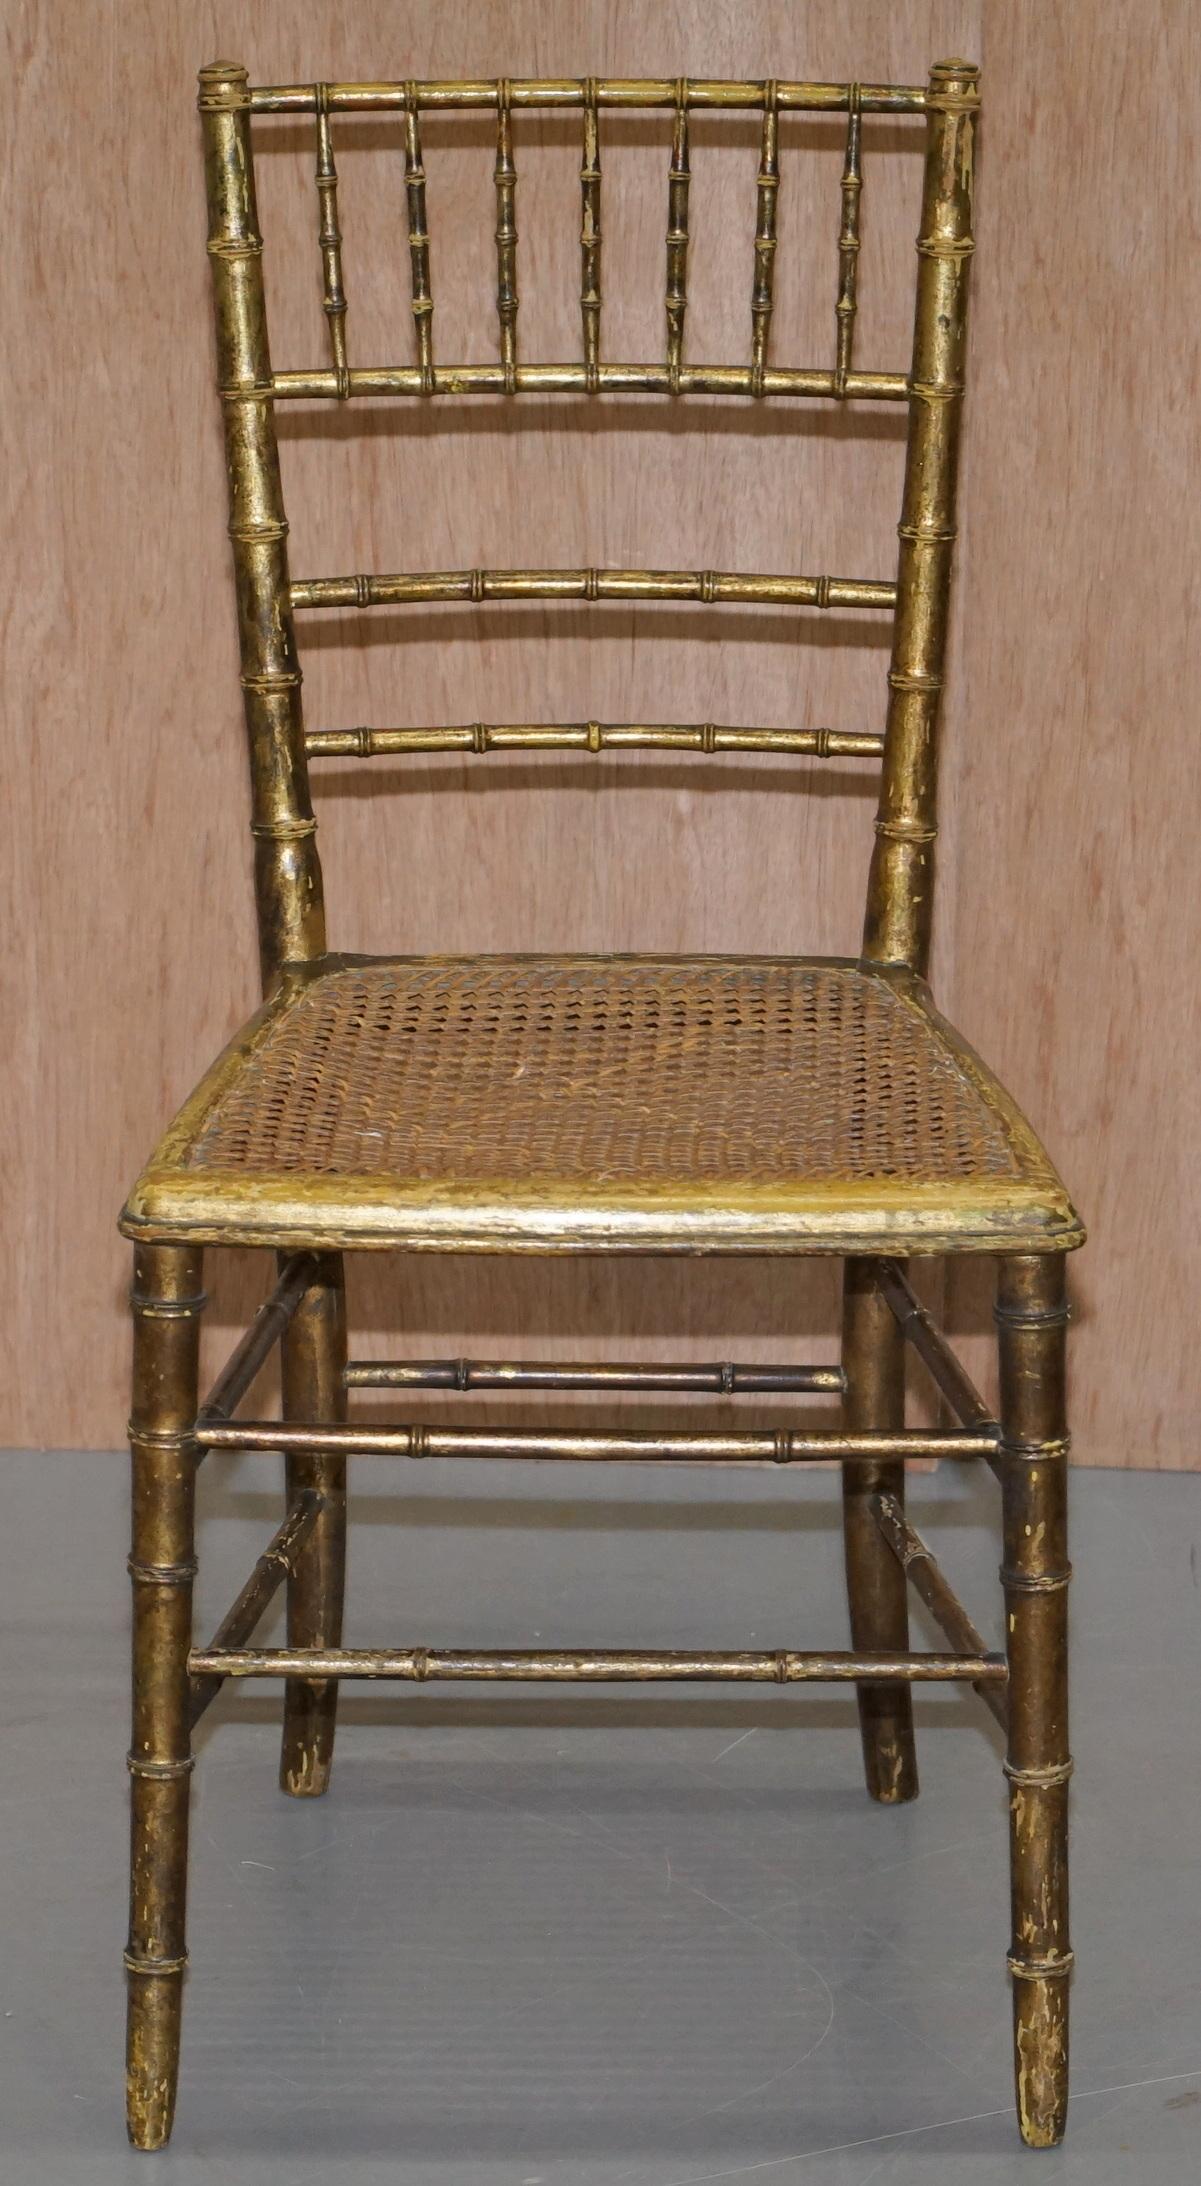 Pair of Original Giltwood Famboo Regency Bergere Chairs with Period Gold Gilding For Sale 10